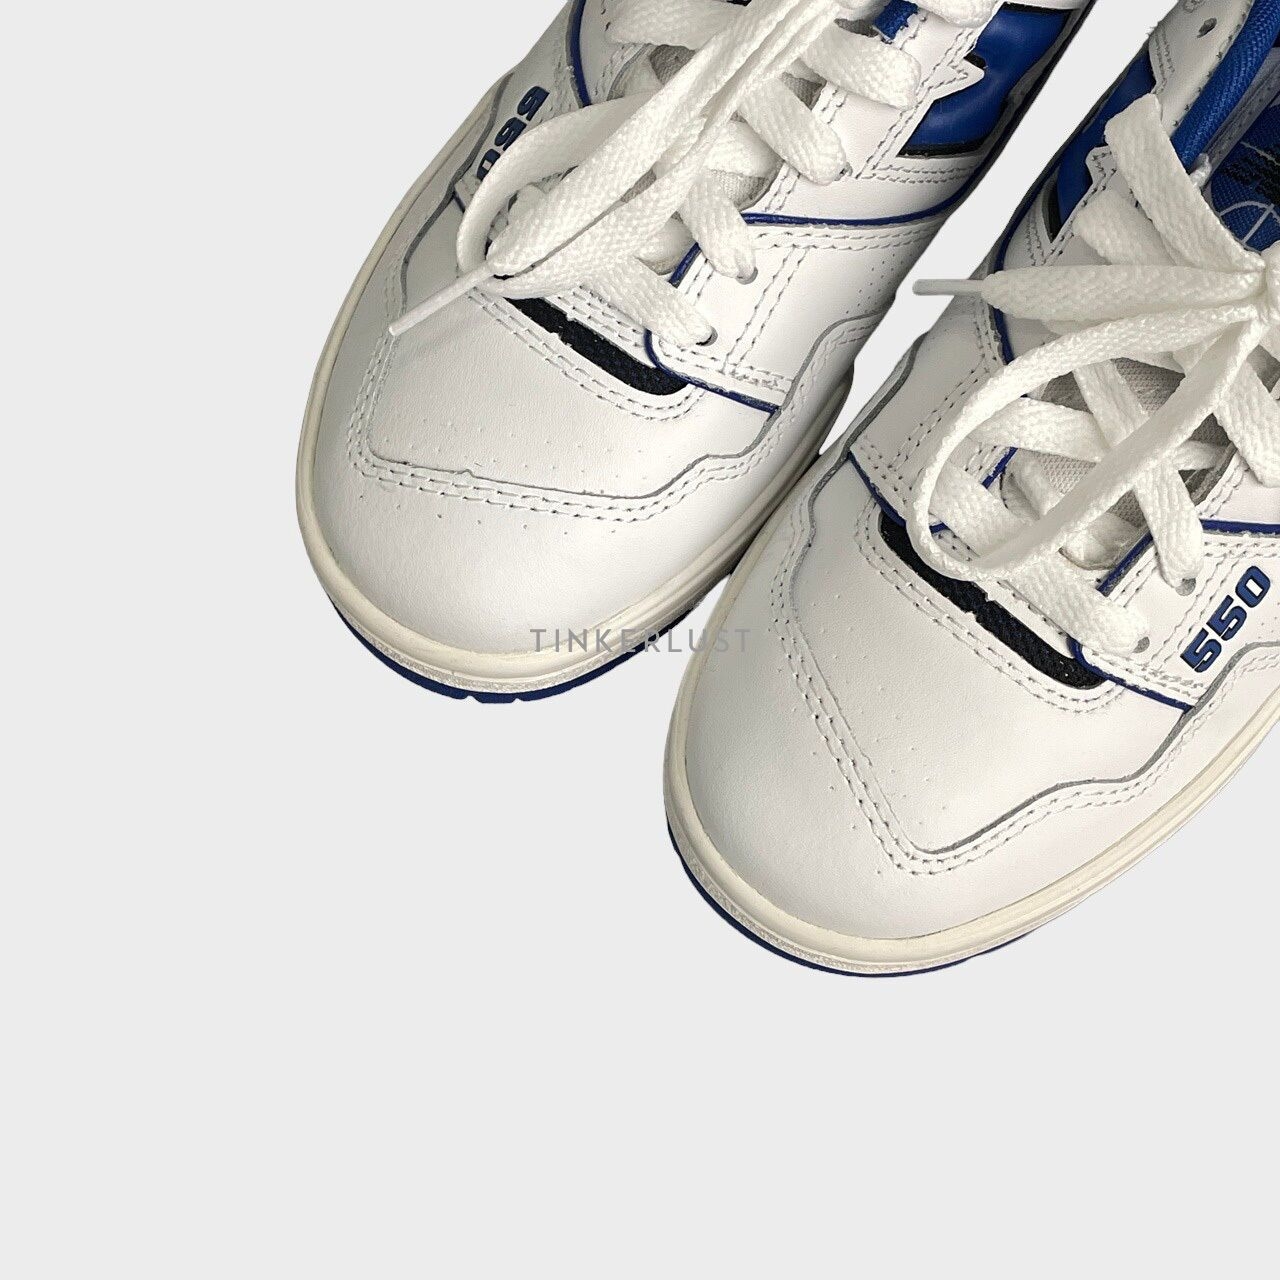 New Balance Blue & White Sneakers